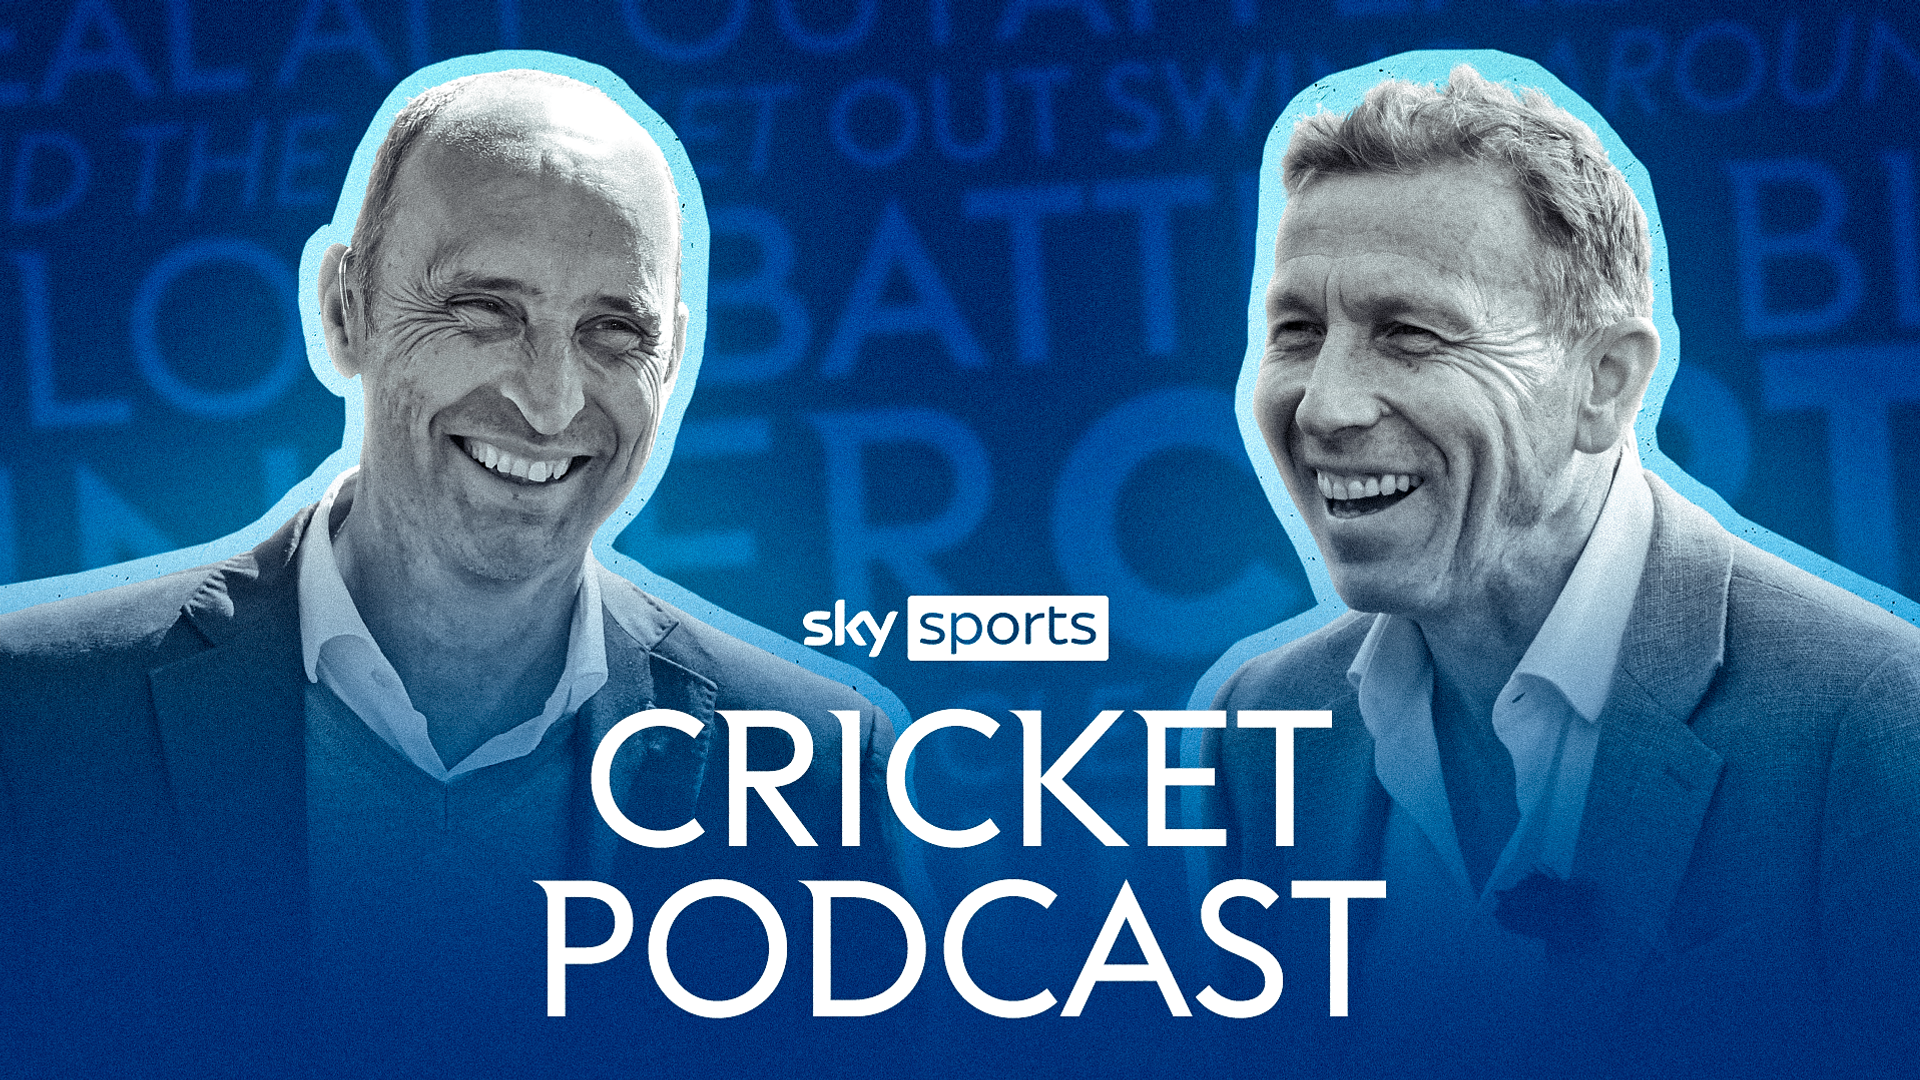 PODCAST: Who are T20 World Cup favourites? Sky pundits assess contenders